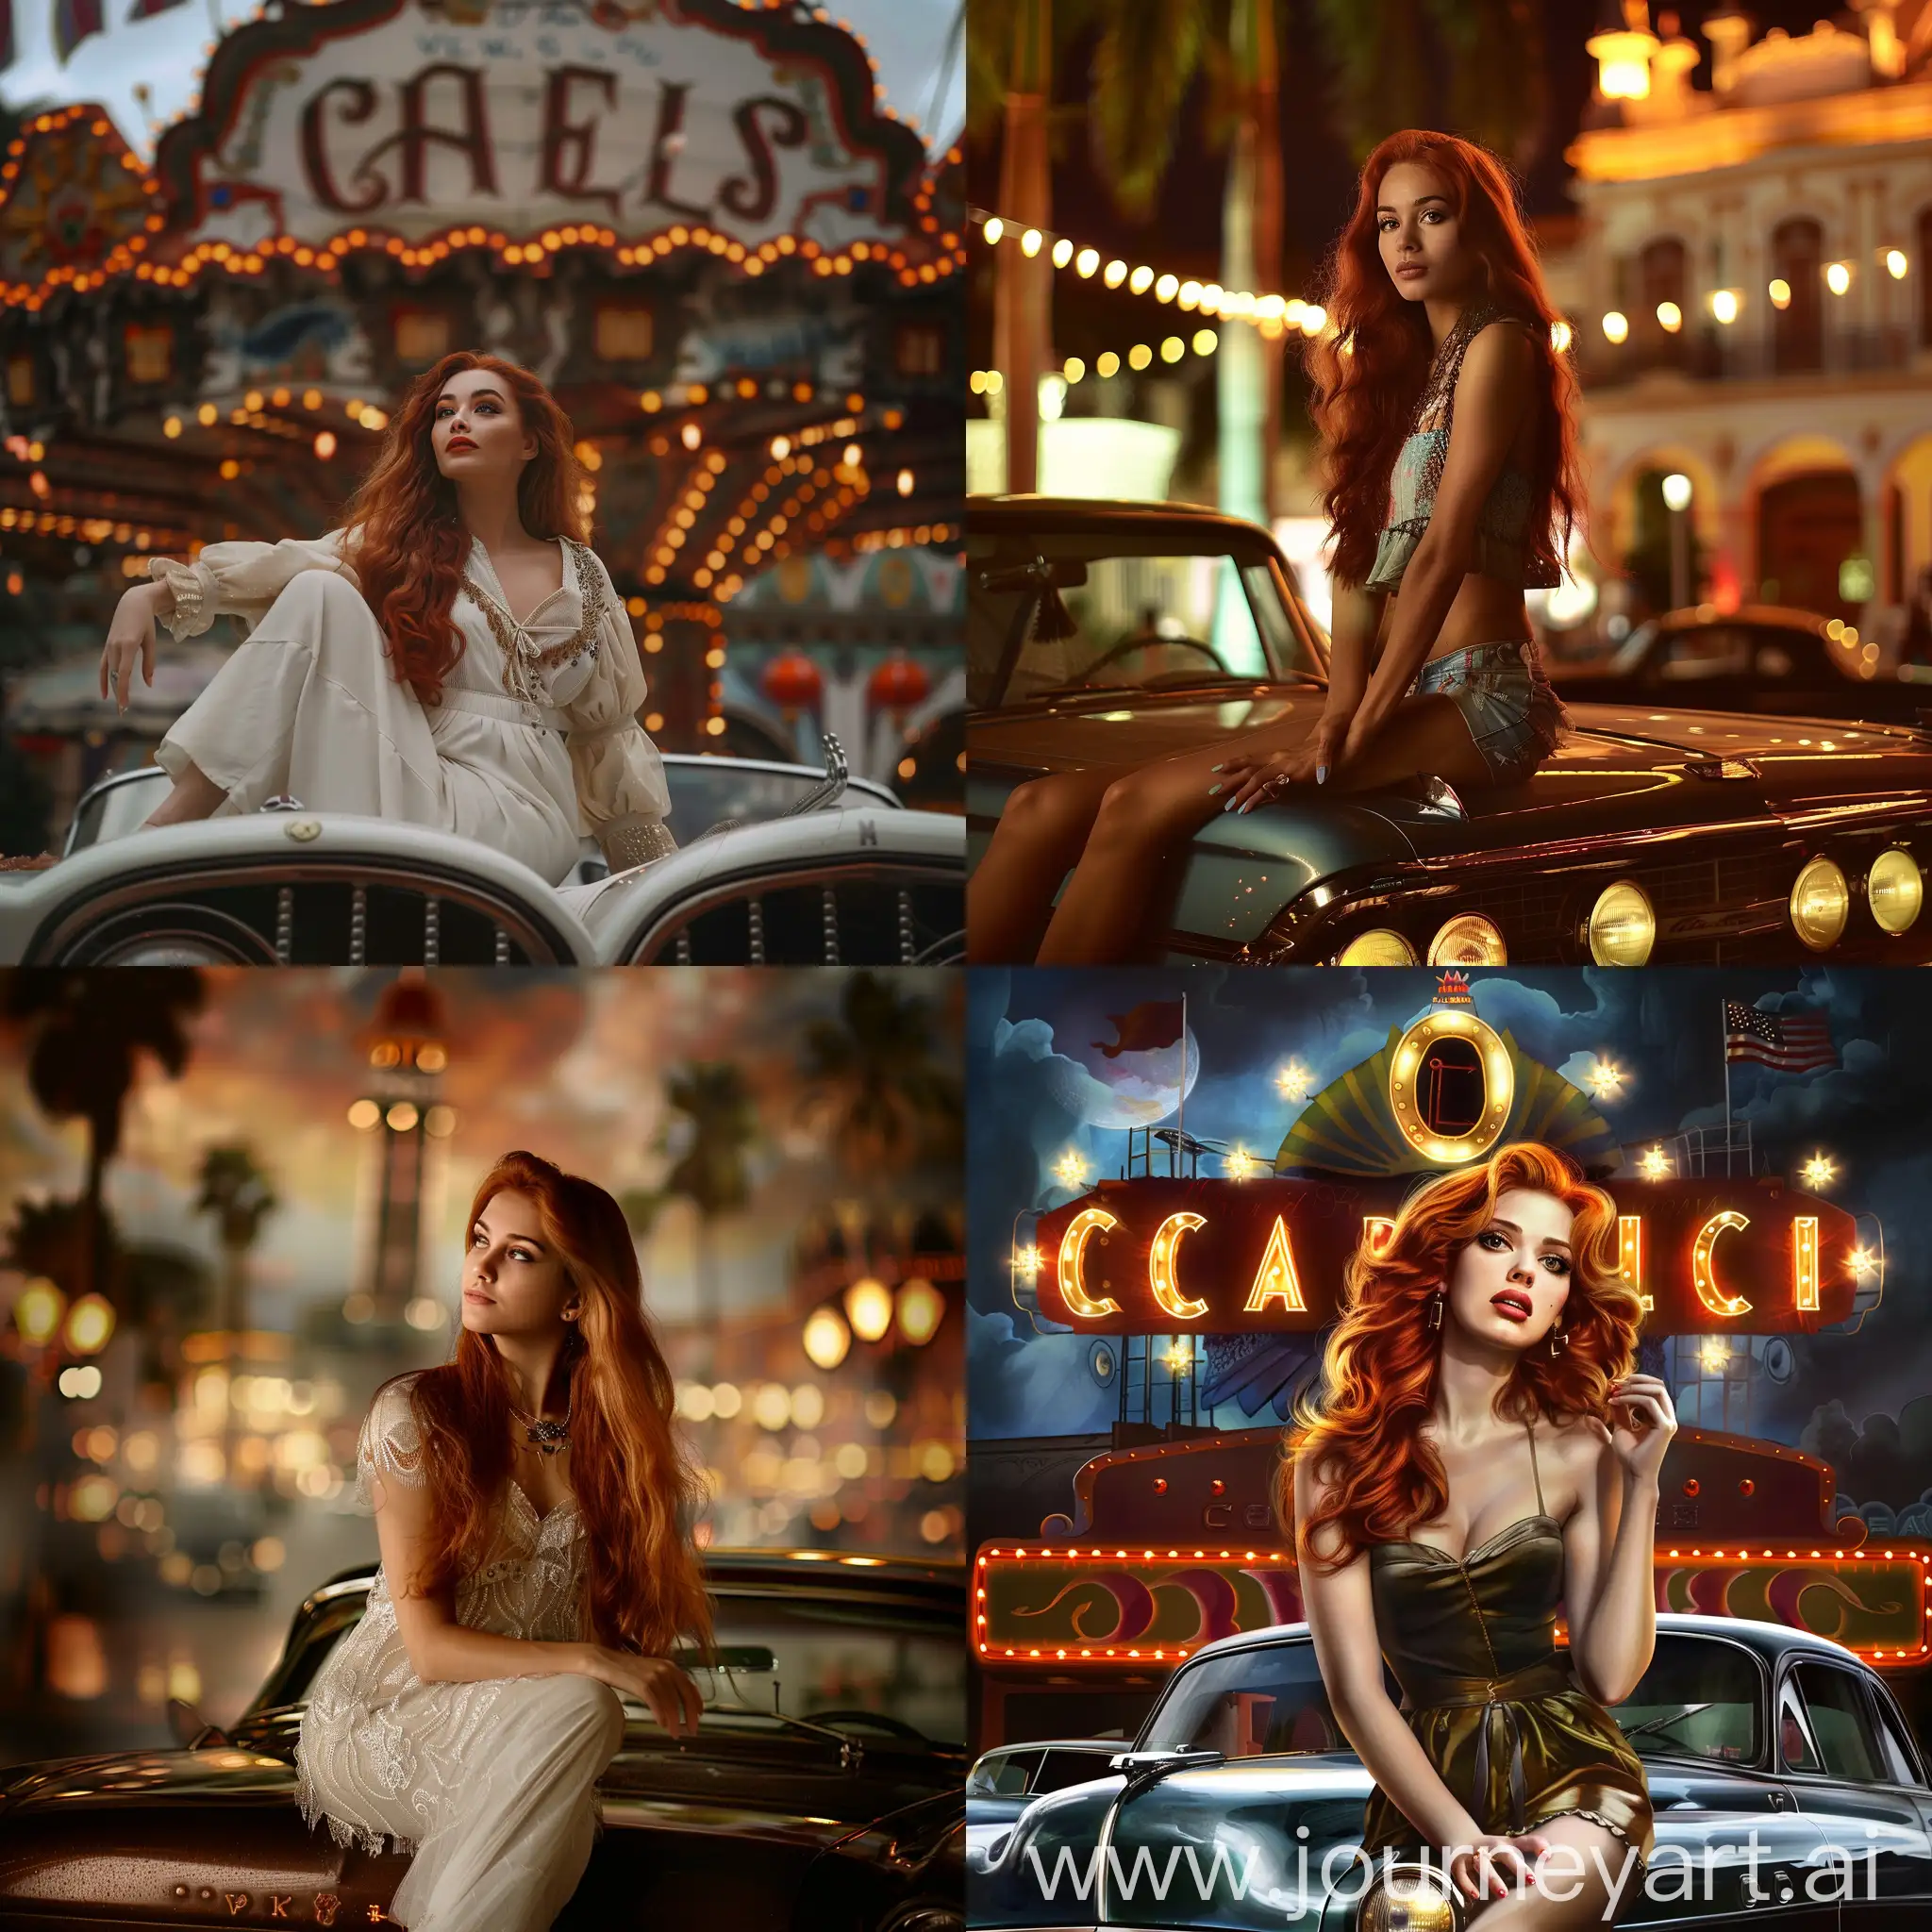 Stylish-Woman-with-Red-Hair-Posing-on-Vintage-Car-near-Carousel